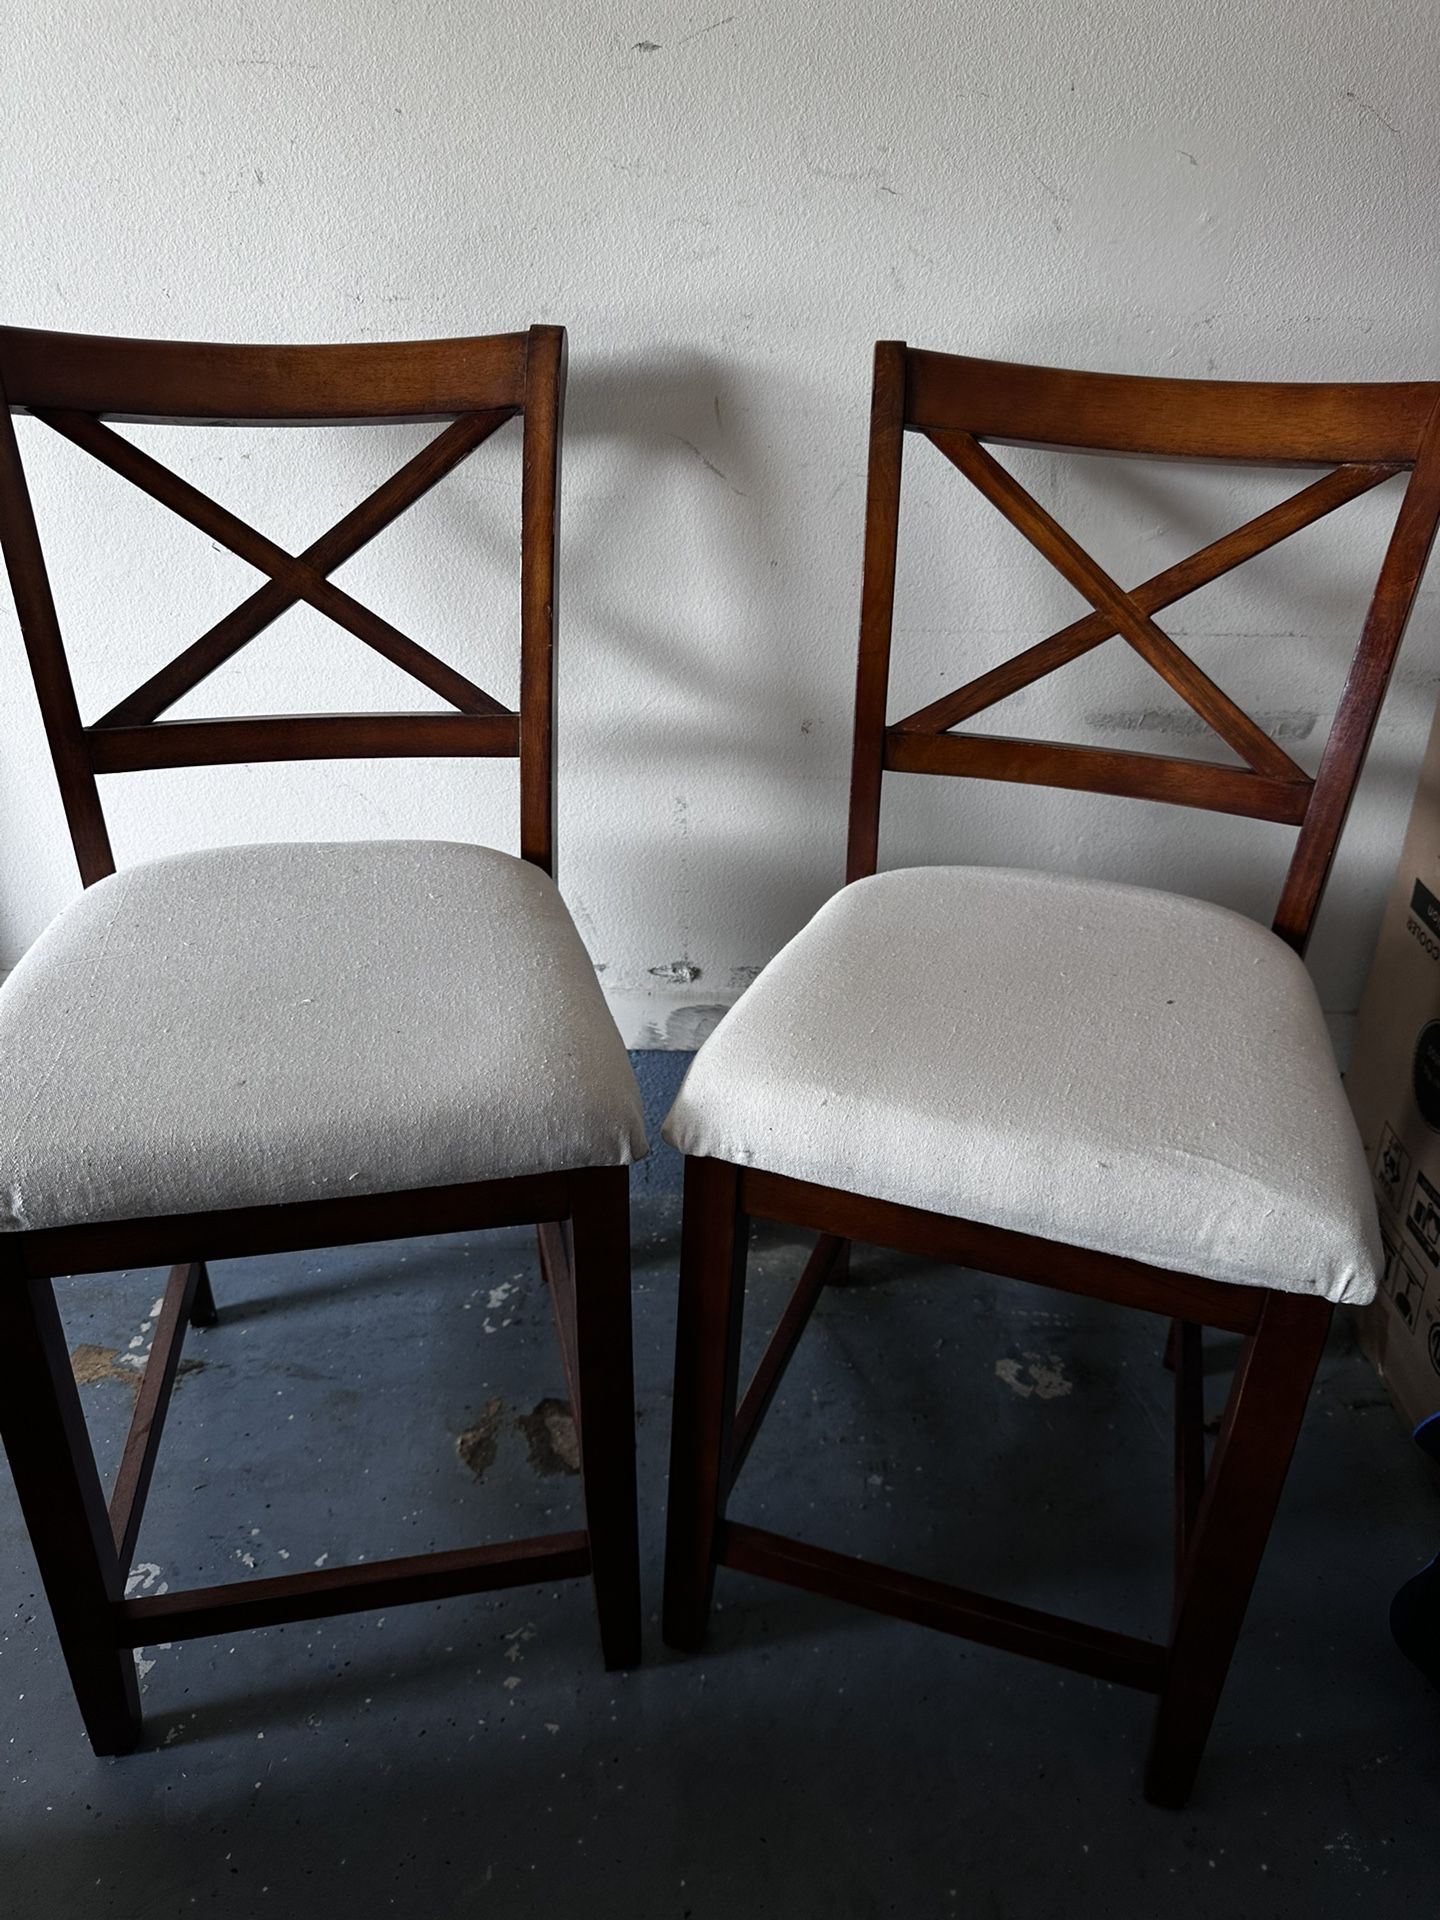 4 Counter Height Chairs 